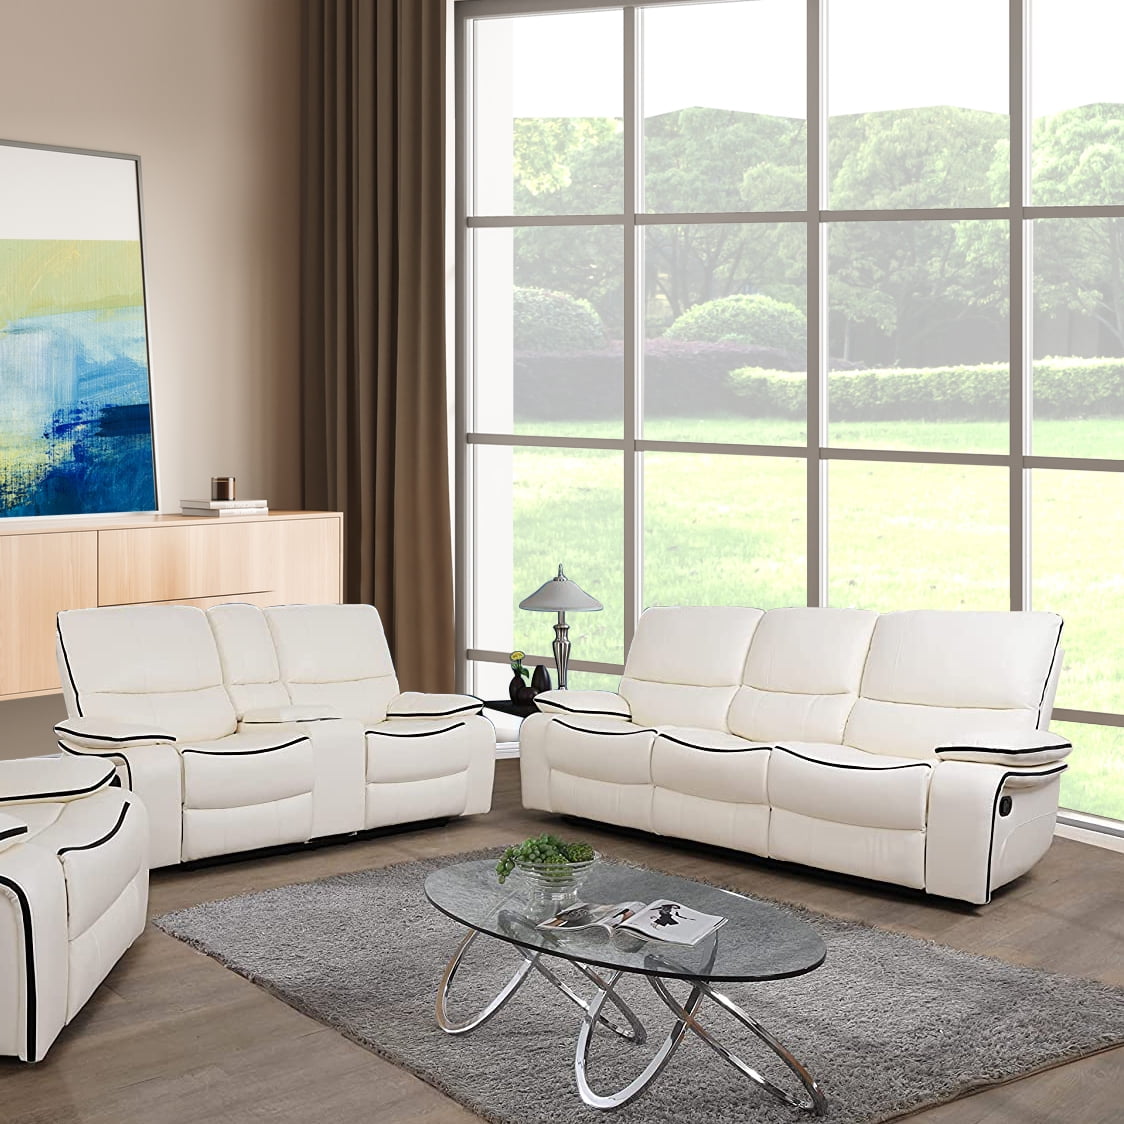 Ainehome 2 Pieces Faux Leather Reclining Configurable Living Room Set ...